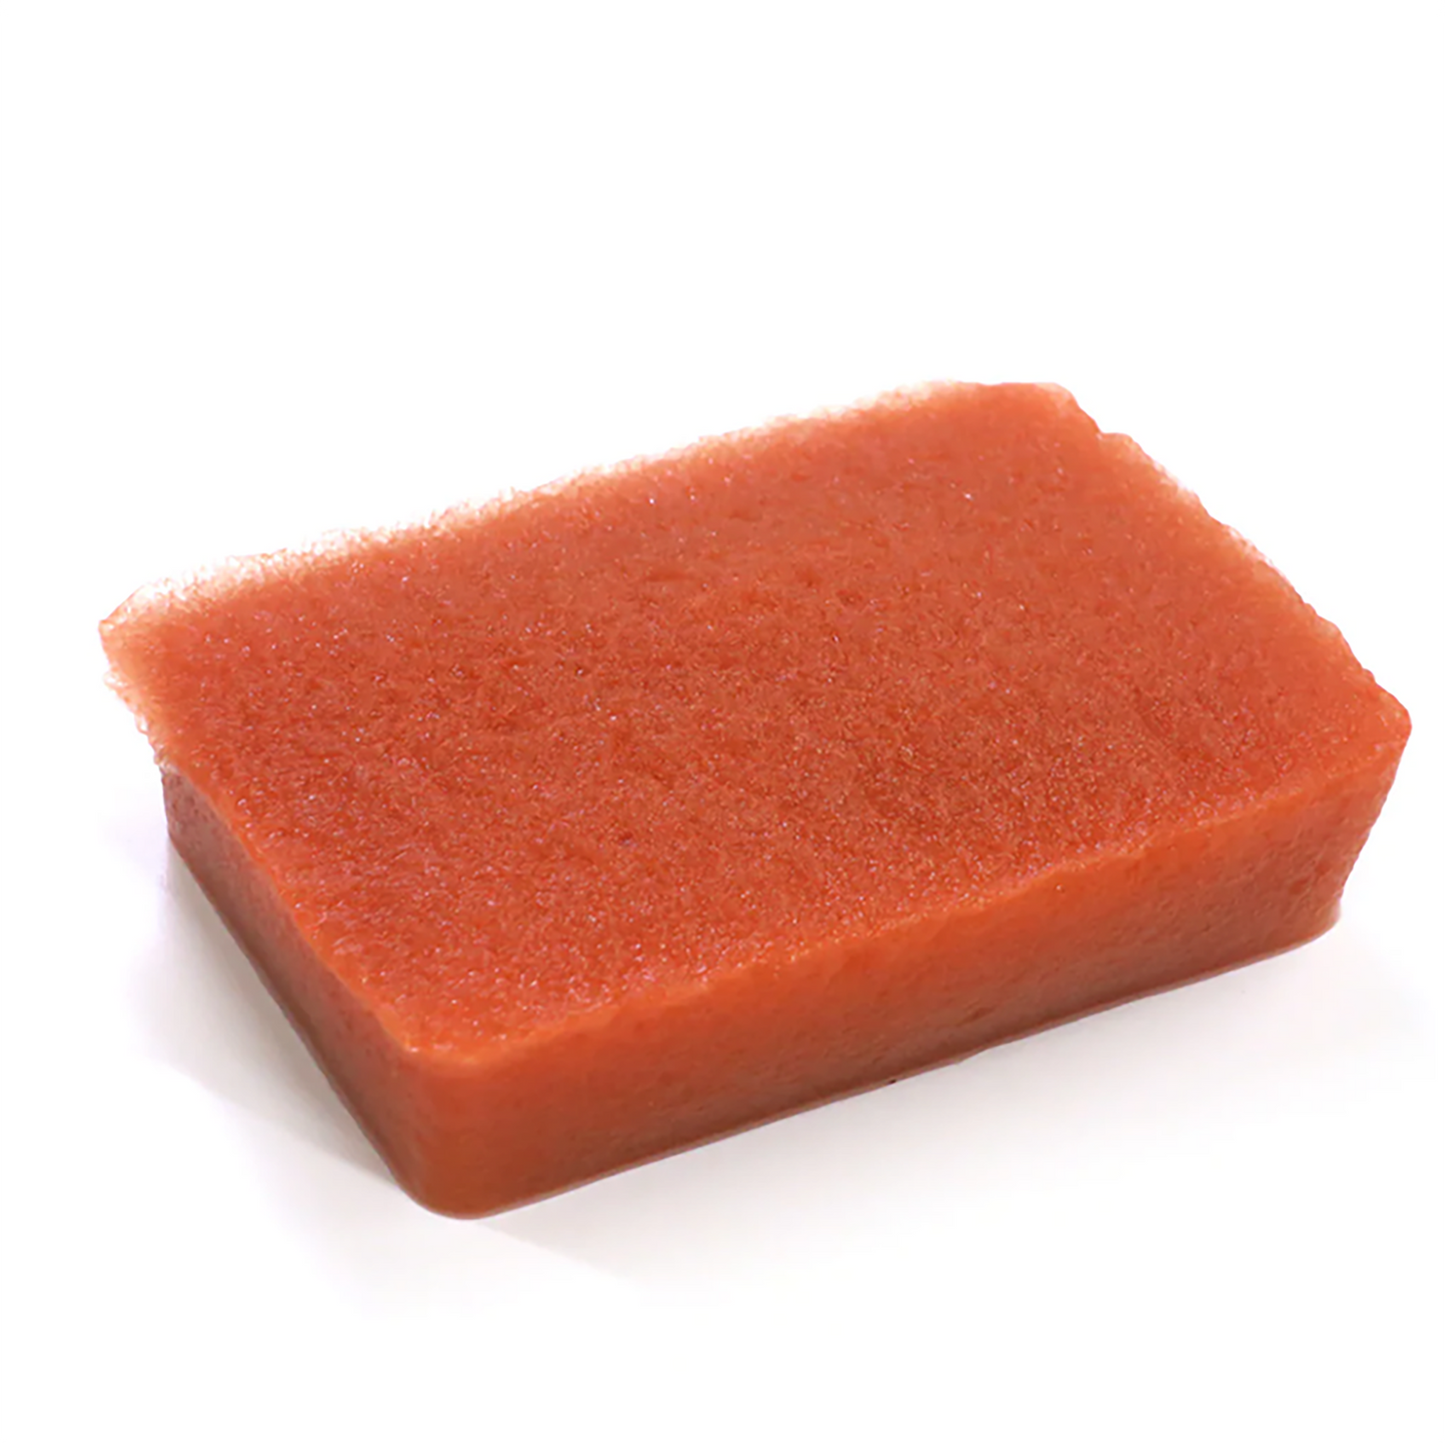 The VTT Standard Type against a white background. It looks like a block of red, soft, spongey tissue.